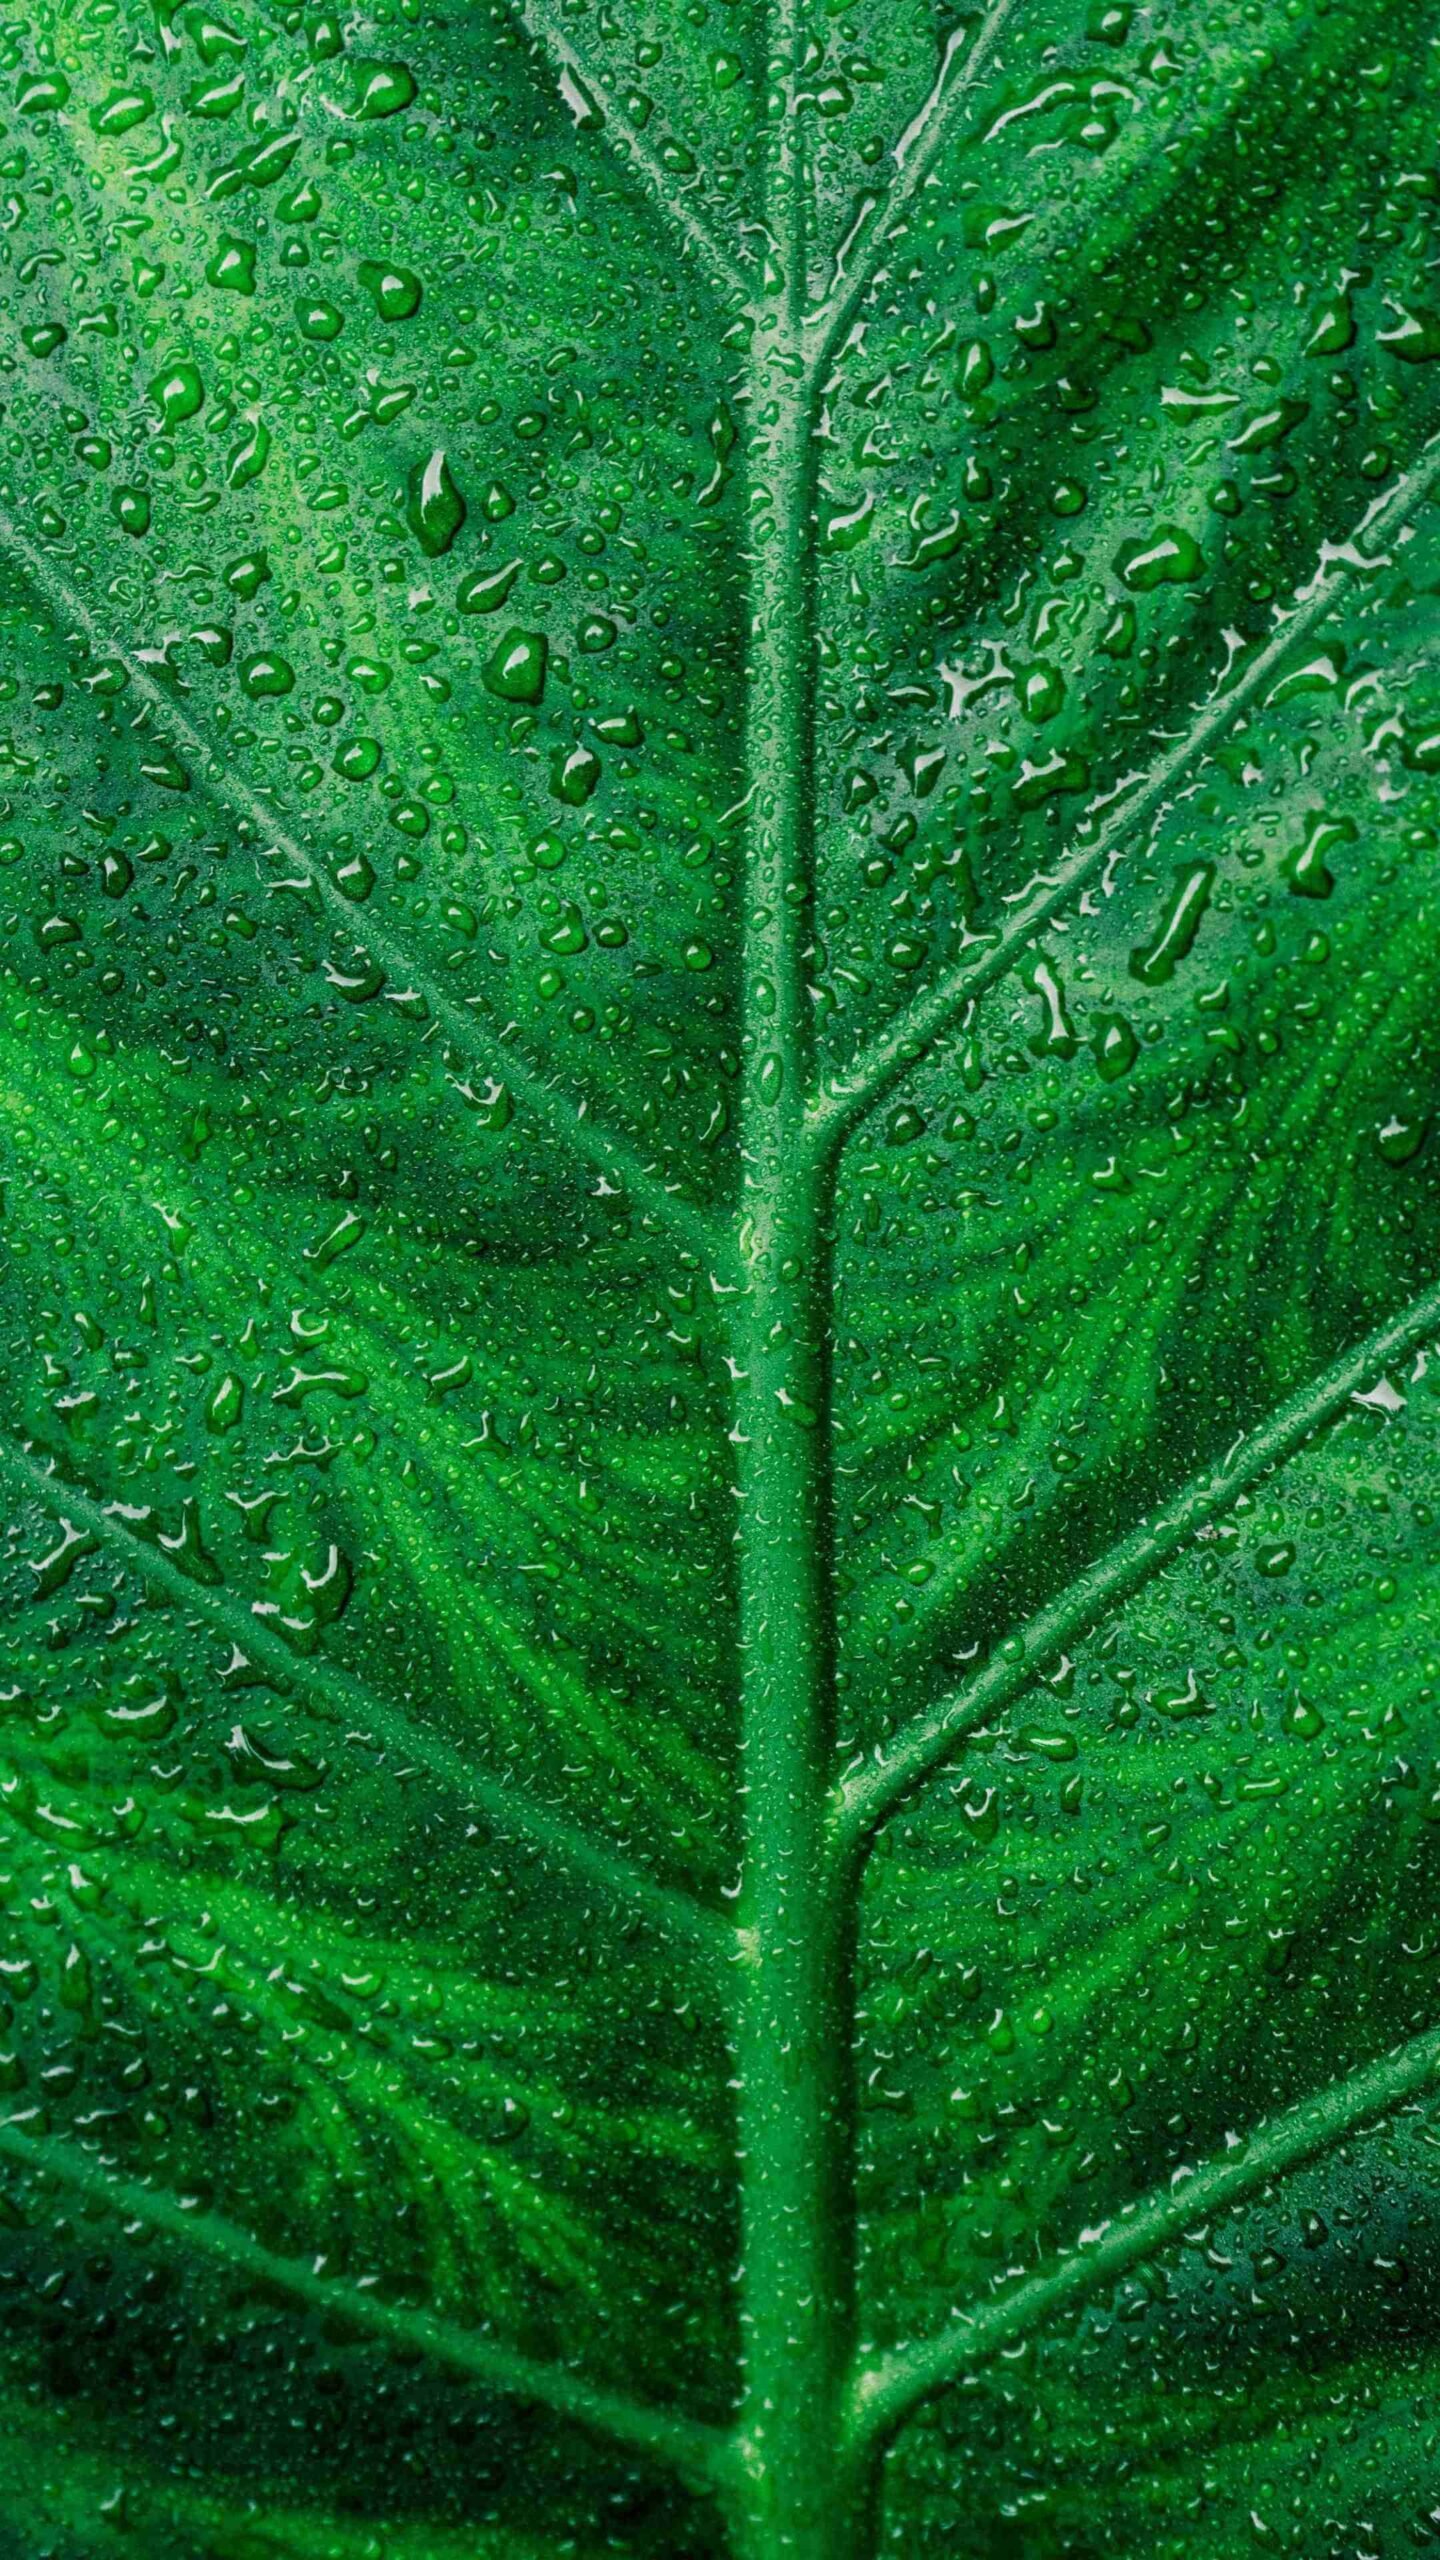 4K Wet Leave HD iPhone Wallpaper scaled